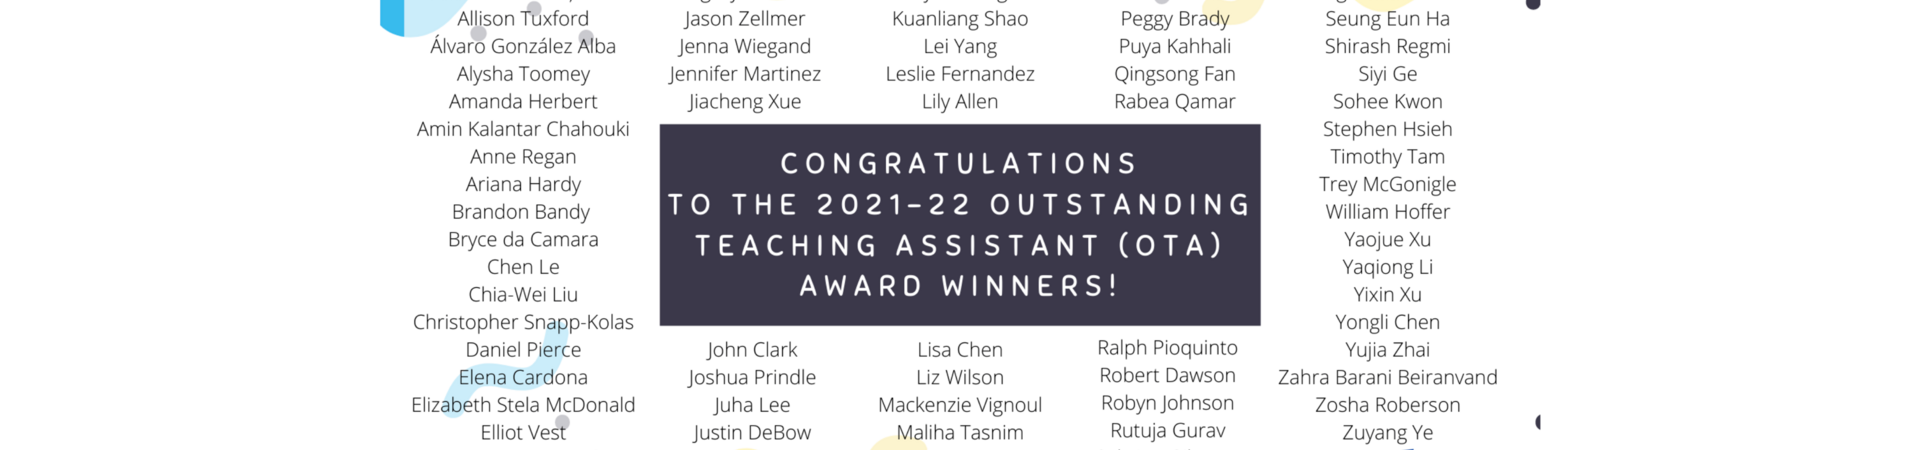 This is a list of the OTA Award winners for 2022. For a text version, visit: https://tadp.ucr.edu/teaching-awards/outstanding-teaching-assistant-awards